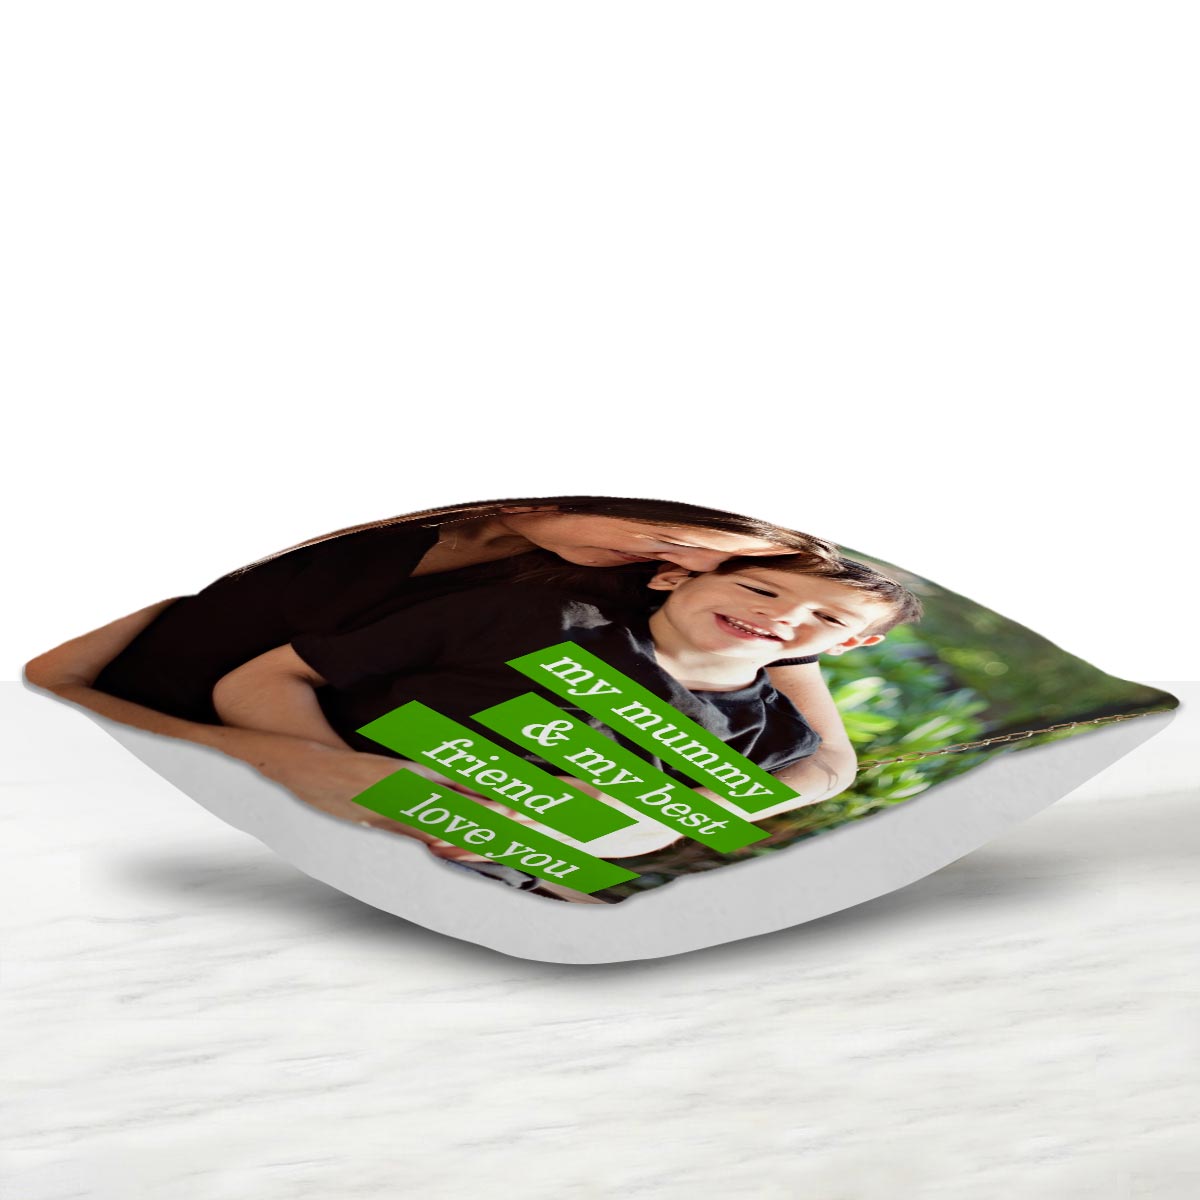 Personalised Mom's My BFF Cushion Gift